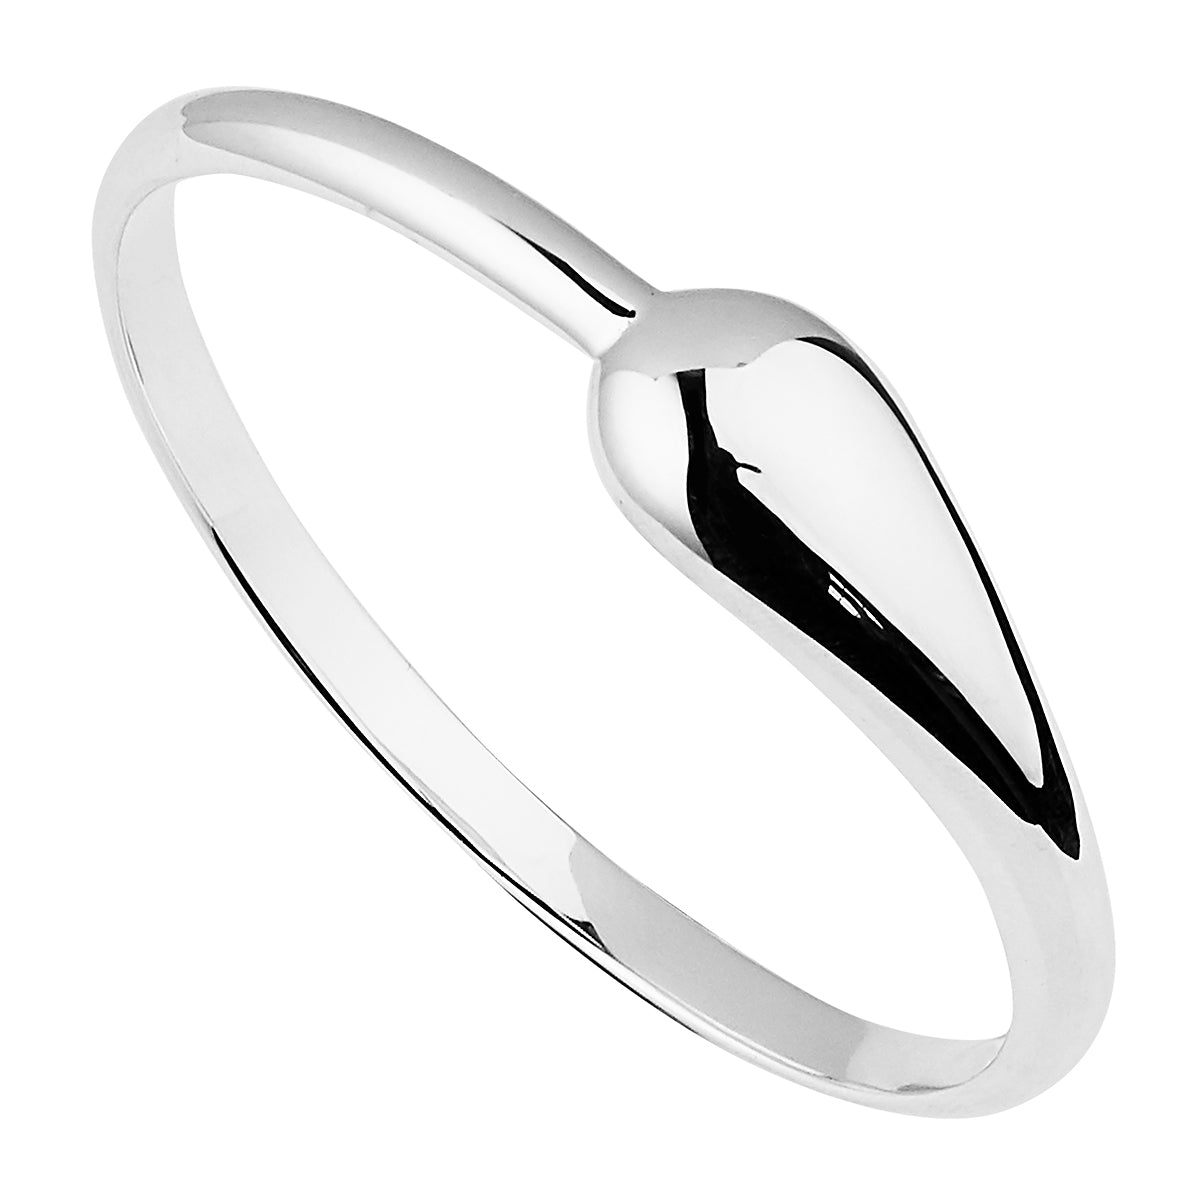 14mm tapered oval silver bangle with teardrop feature, backed, 65mm inner diam, antitarnish